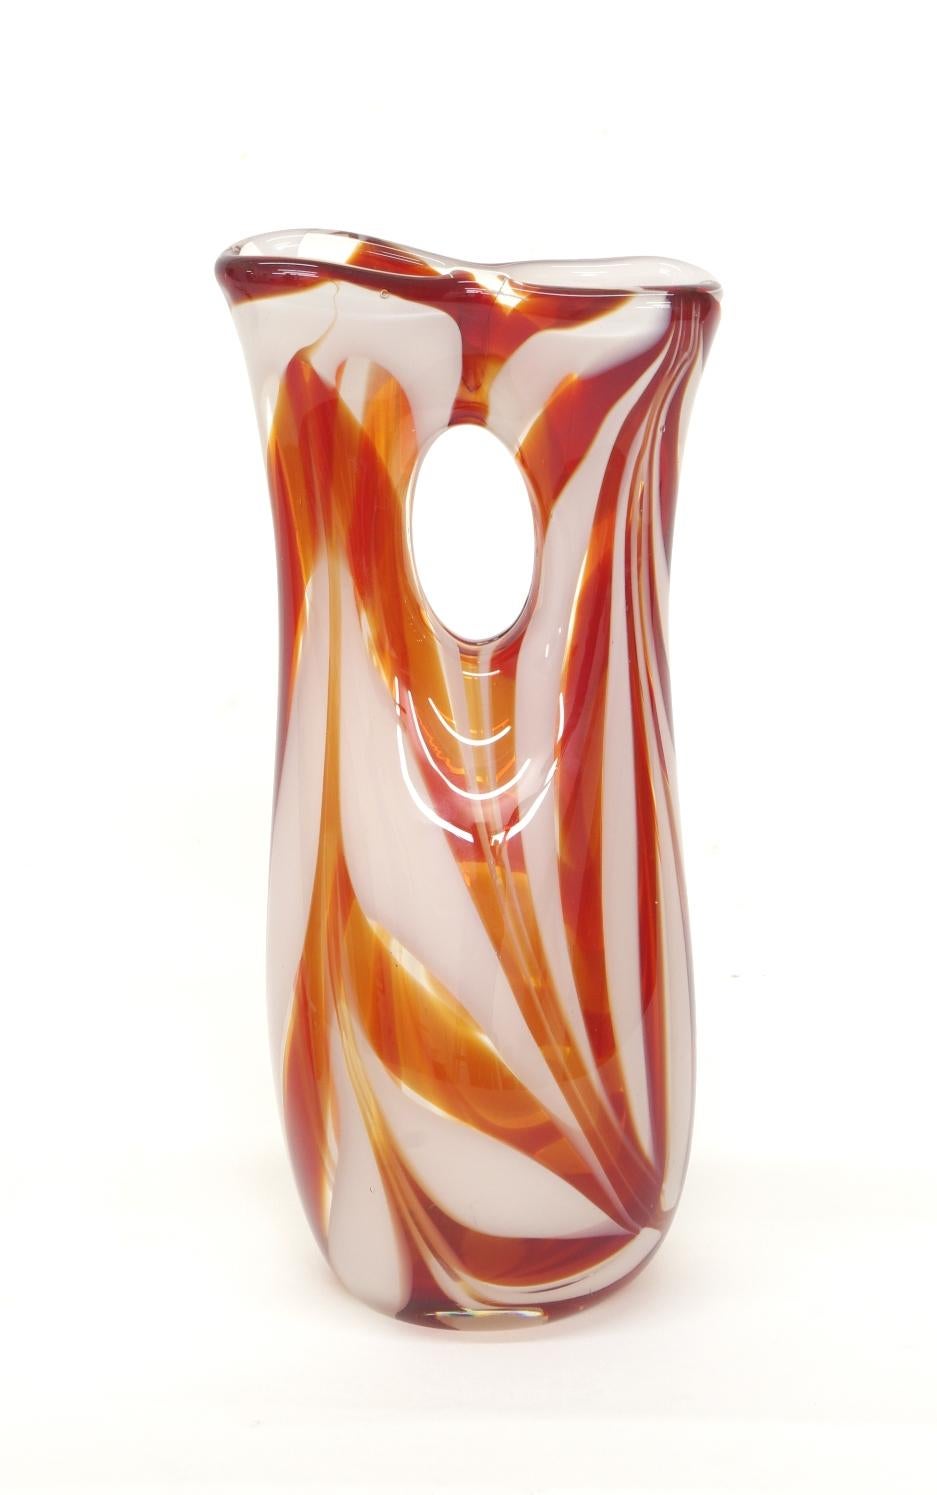 Murano glass vase, orange/red and white candy stripe glass in a clear matrix. Unsigned, with a polished pontil.

This cheerful vase draws its inspiration from ancient glass cosmetic tubes or 'kohl tubes'. Kohl was a black makeup used as eyeliner